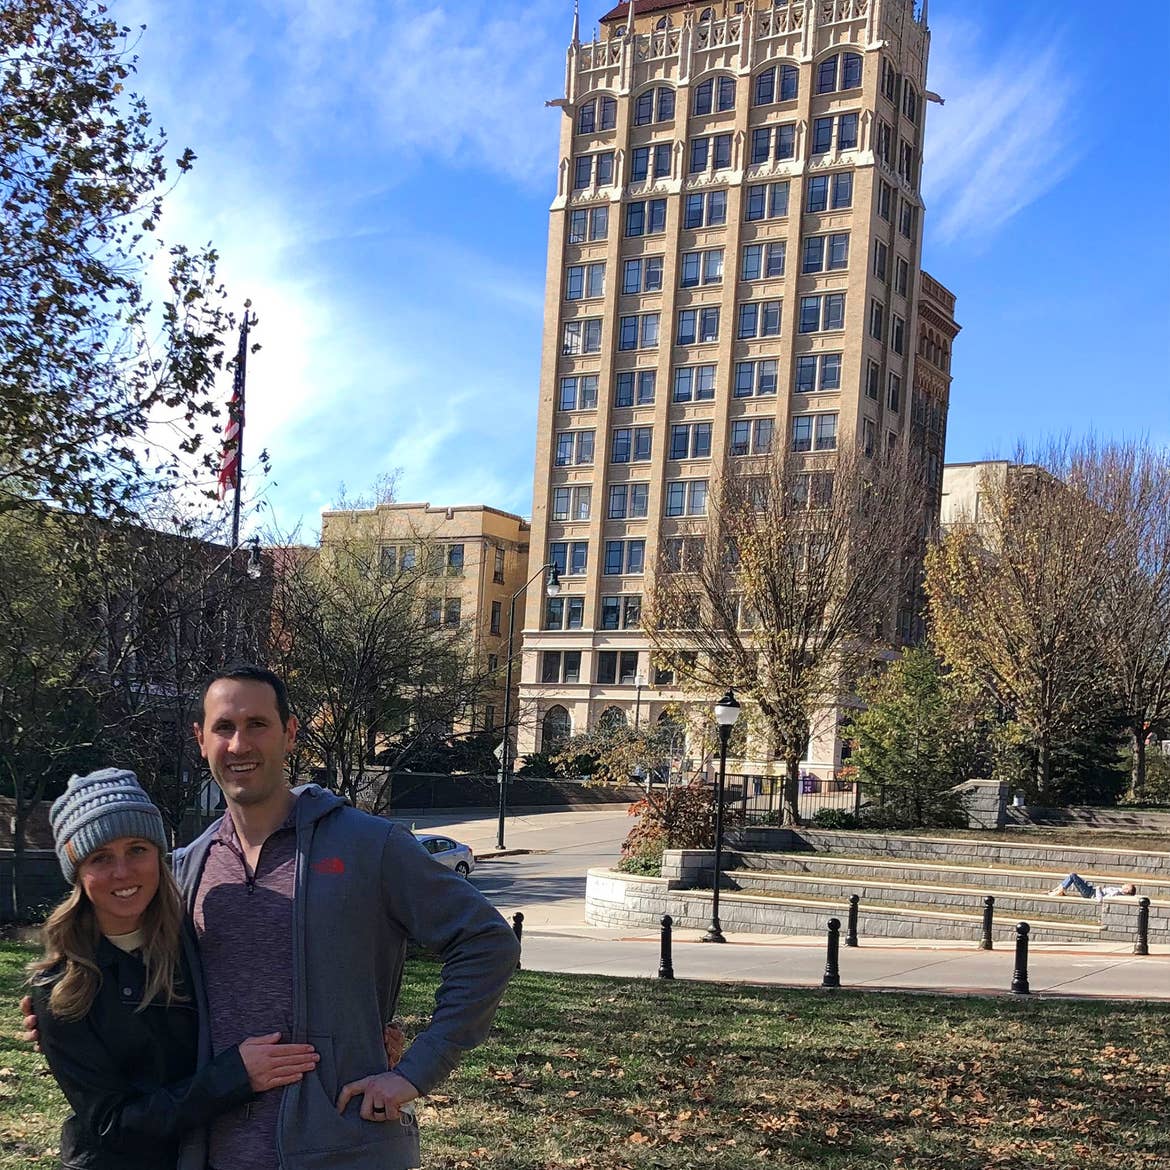 A woman (left) wearing a black jacket and grey beanie while hugging a man (right) wearing a red pullover and grey backpack in front of a building at downtown Asheville, North Carolina.